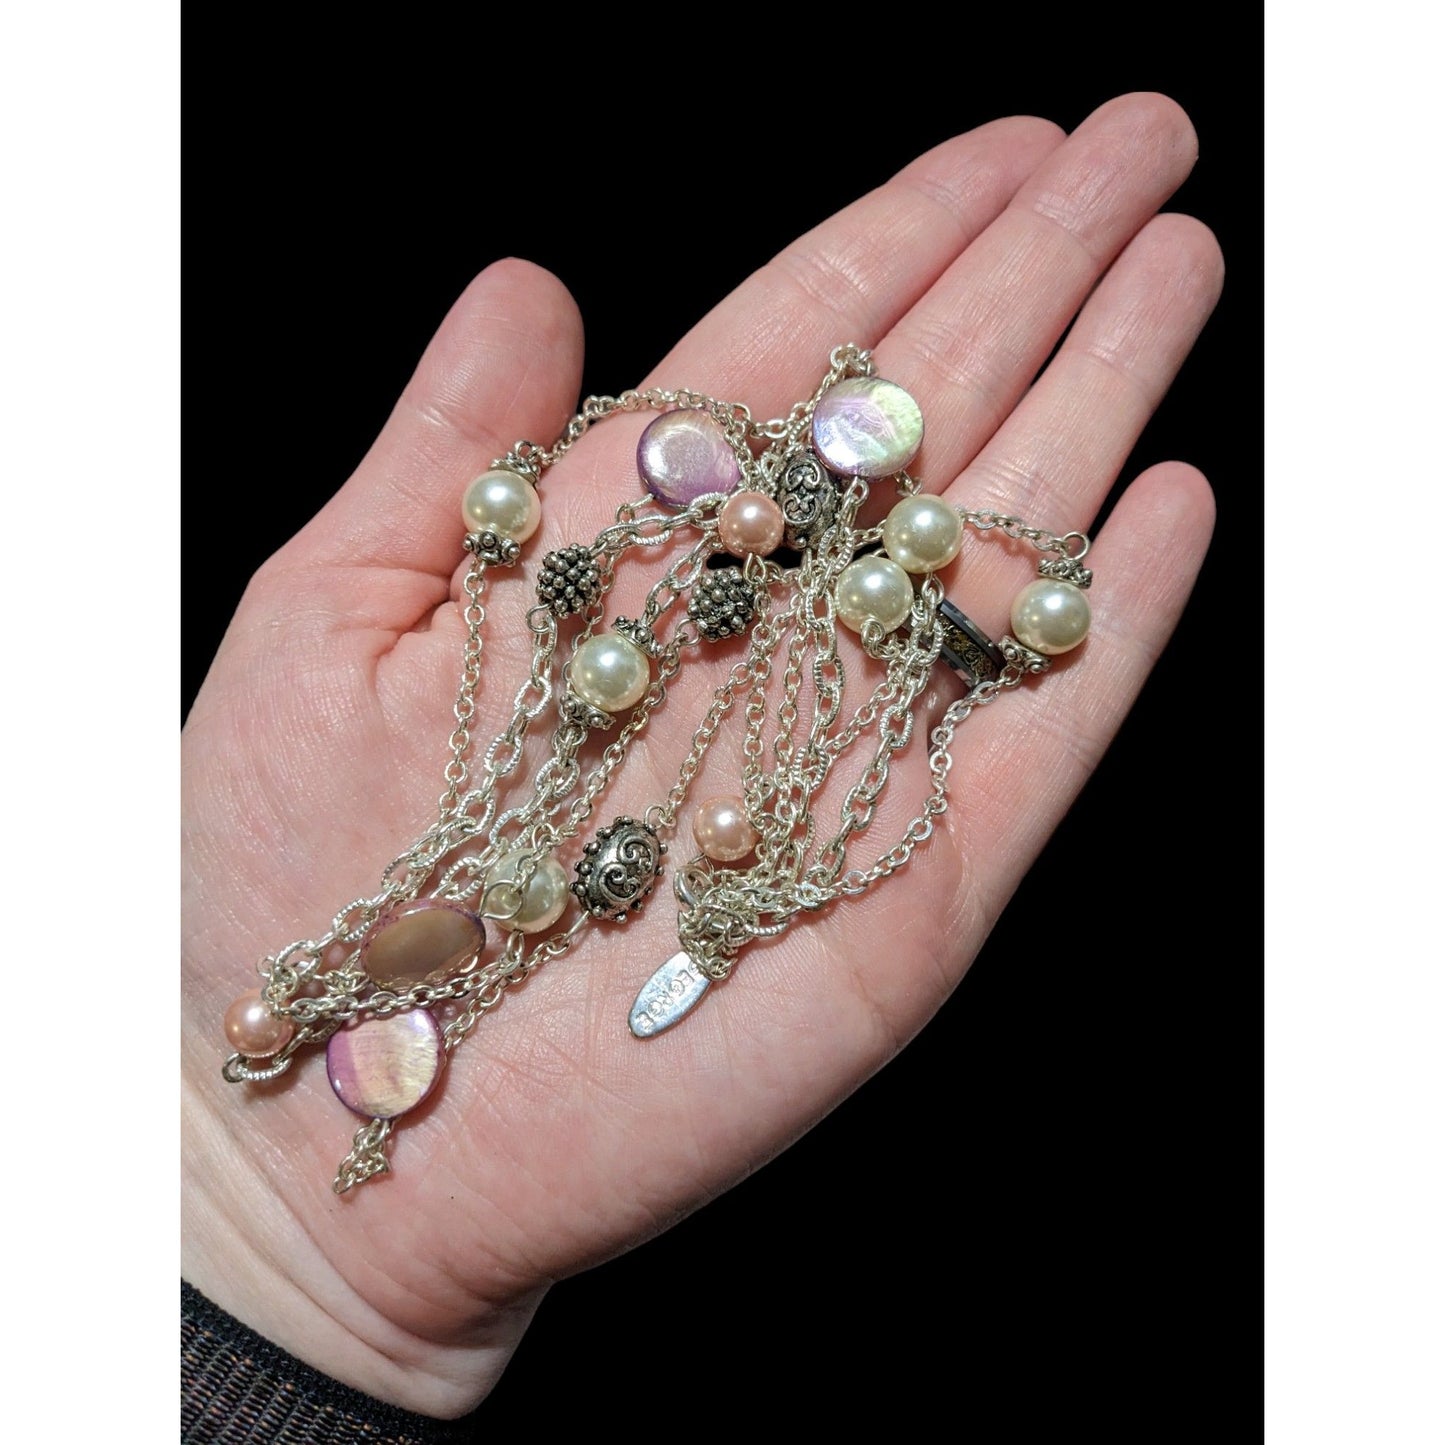 George Silver Necklace With Pink & White Beads